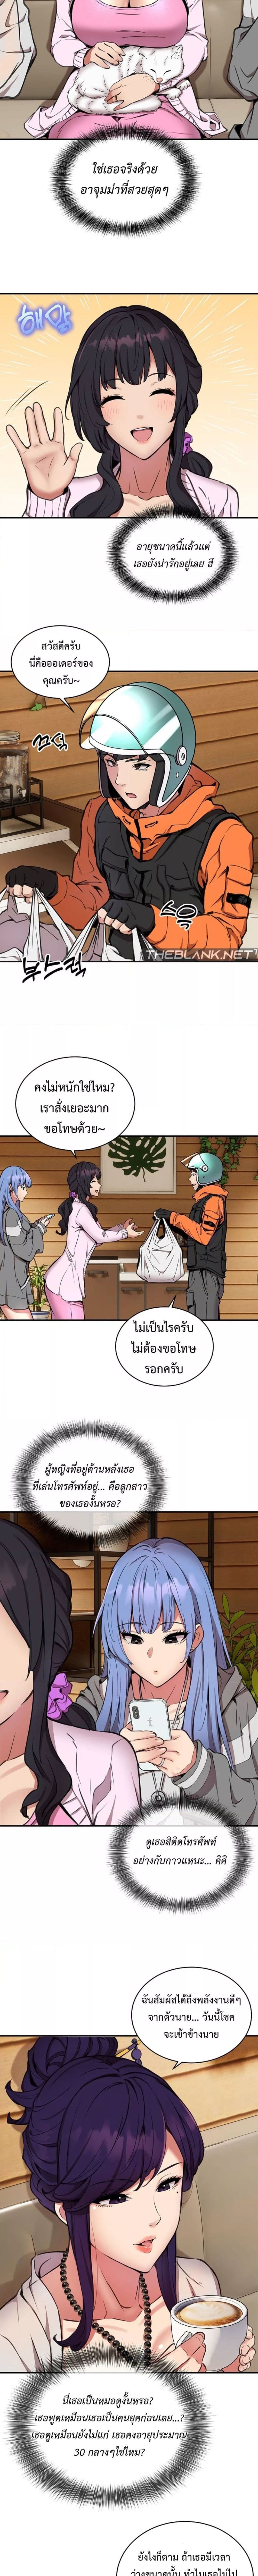 Driver in the New City ตอนที่ 7 ภาพ 7